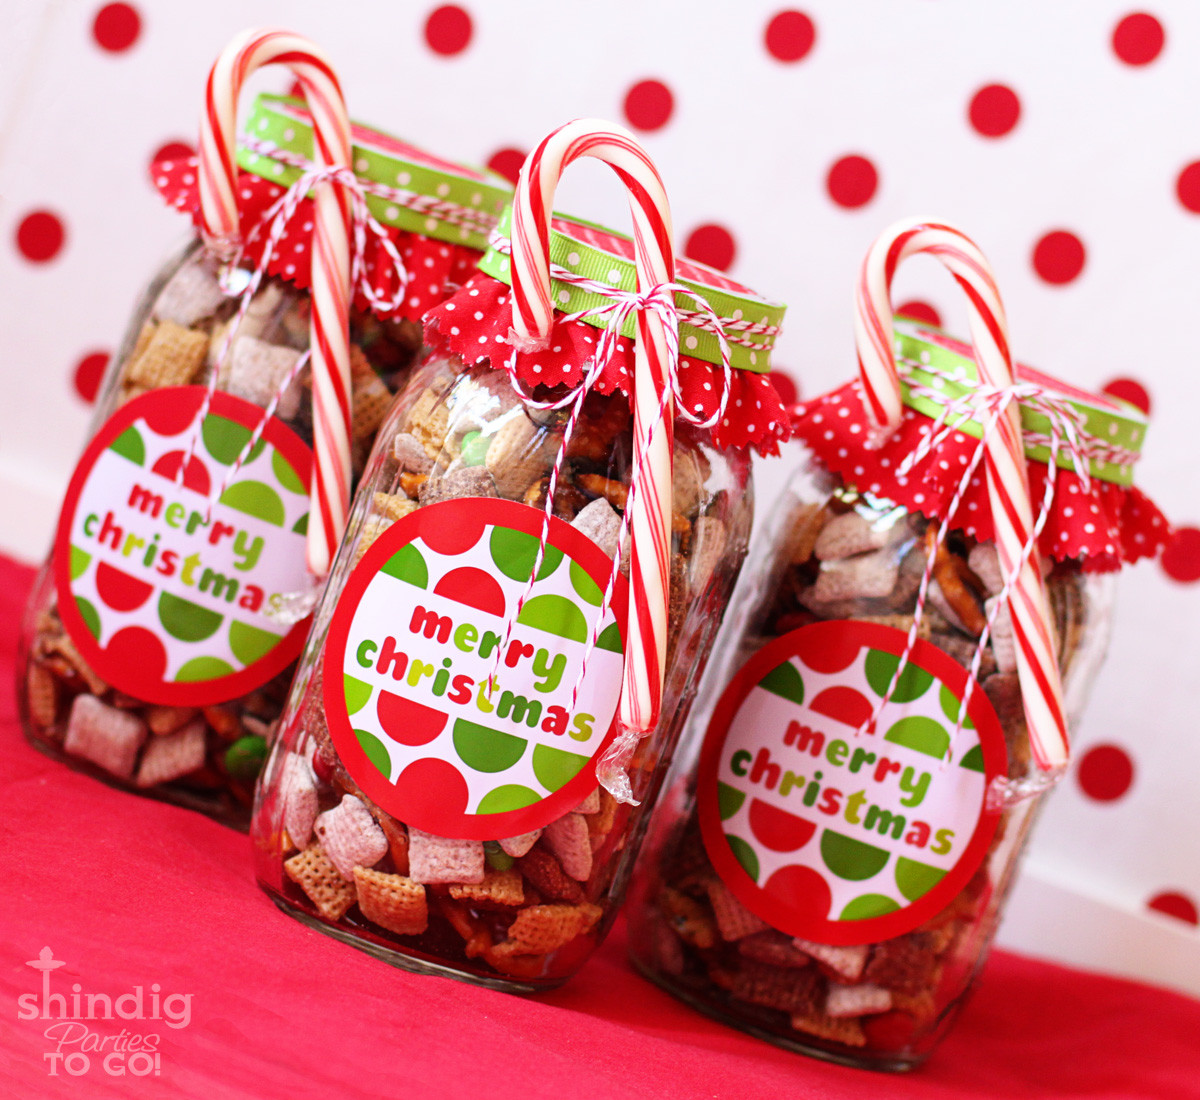 Christmas Party Gift Ideas
 How To Make Handmade Chex Mix Holiday Gifts & Bonus Free